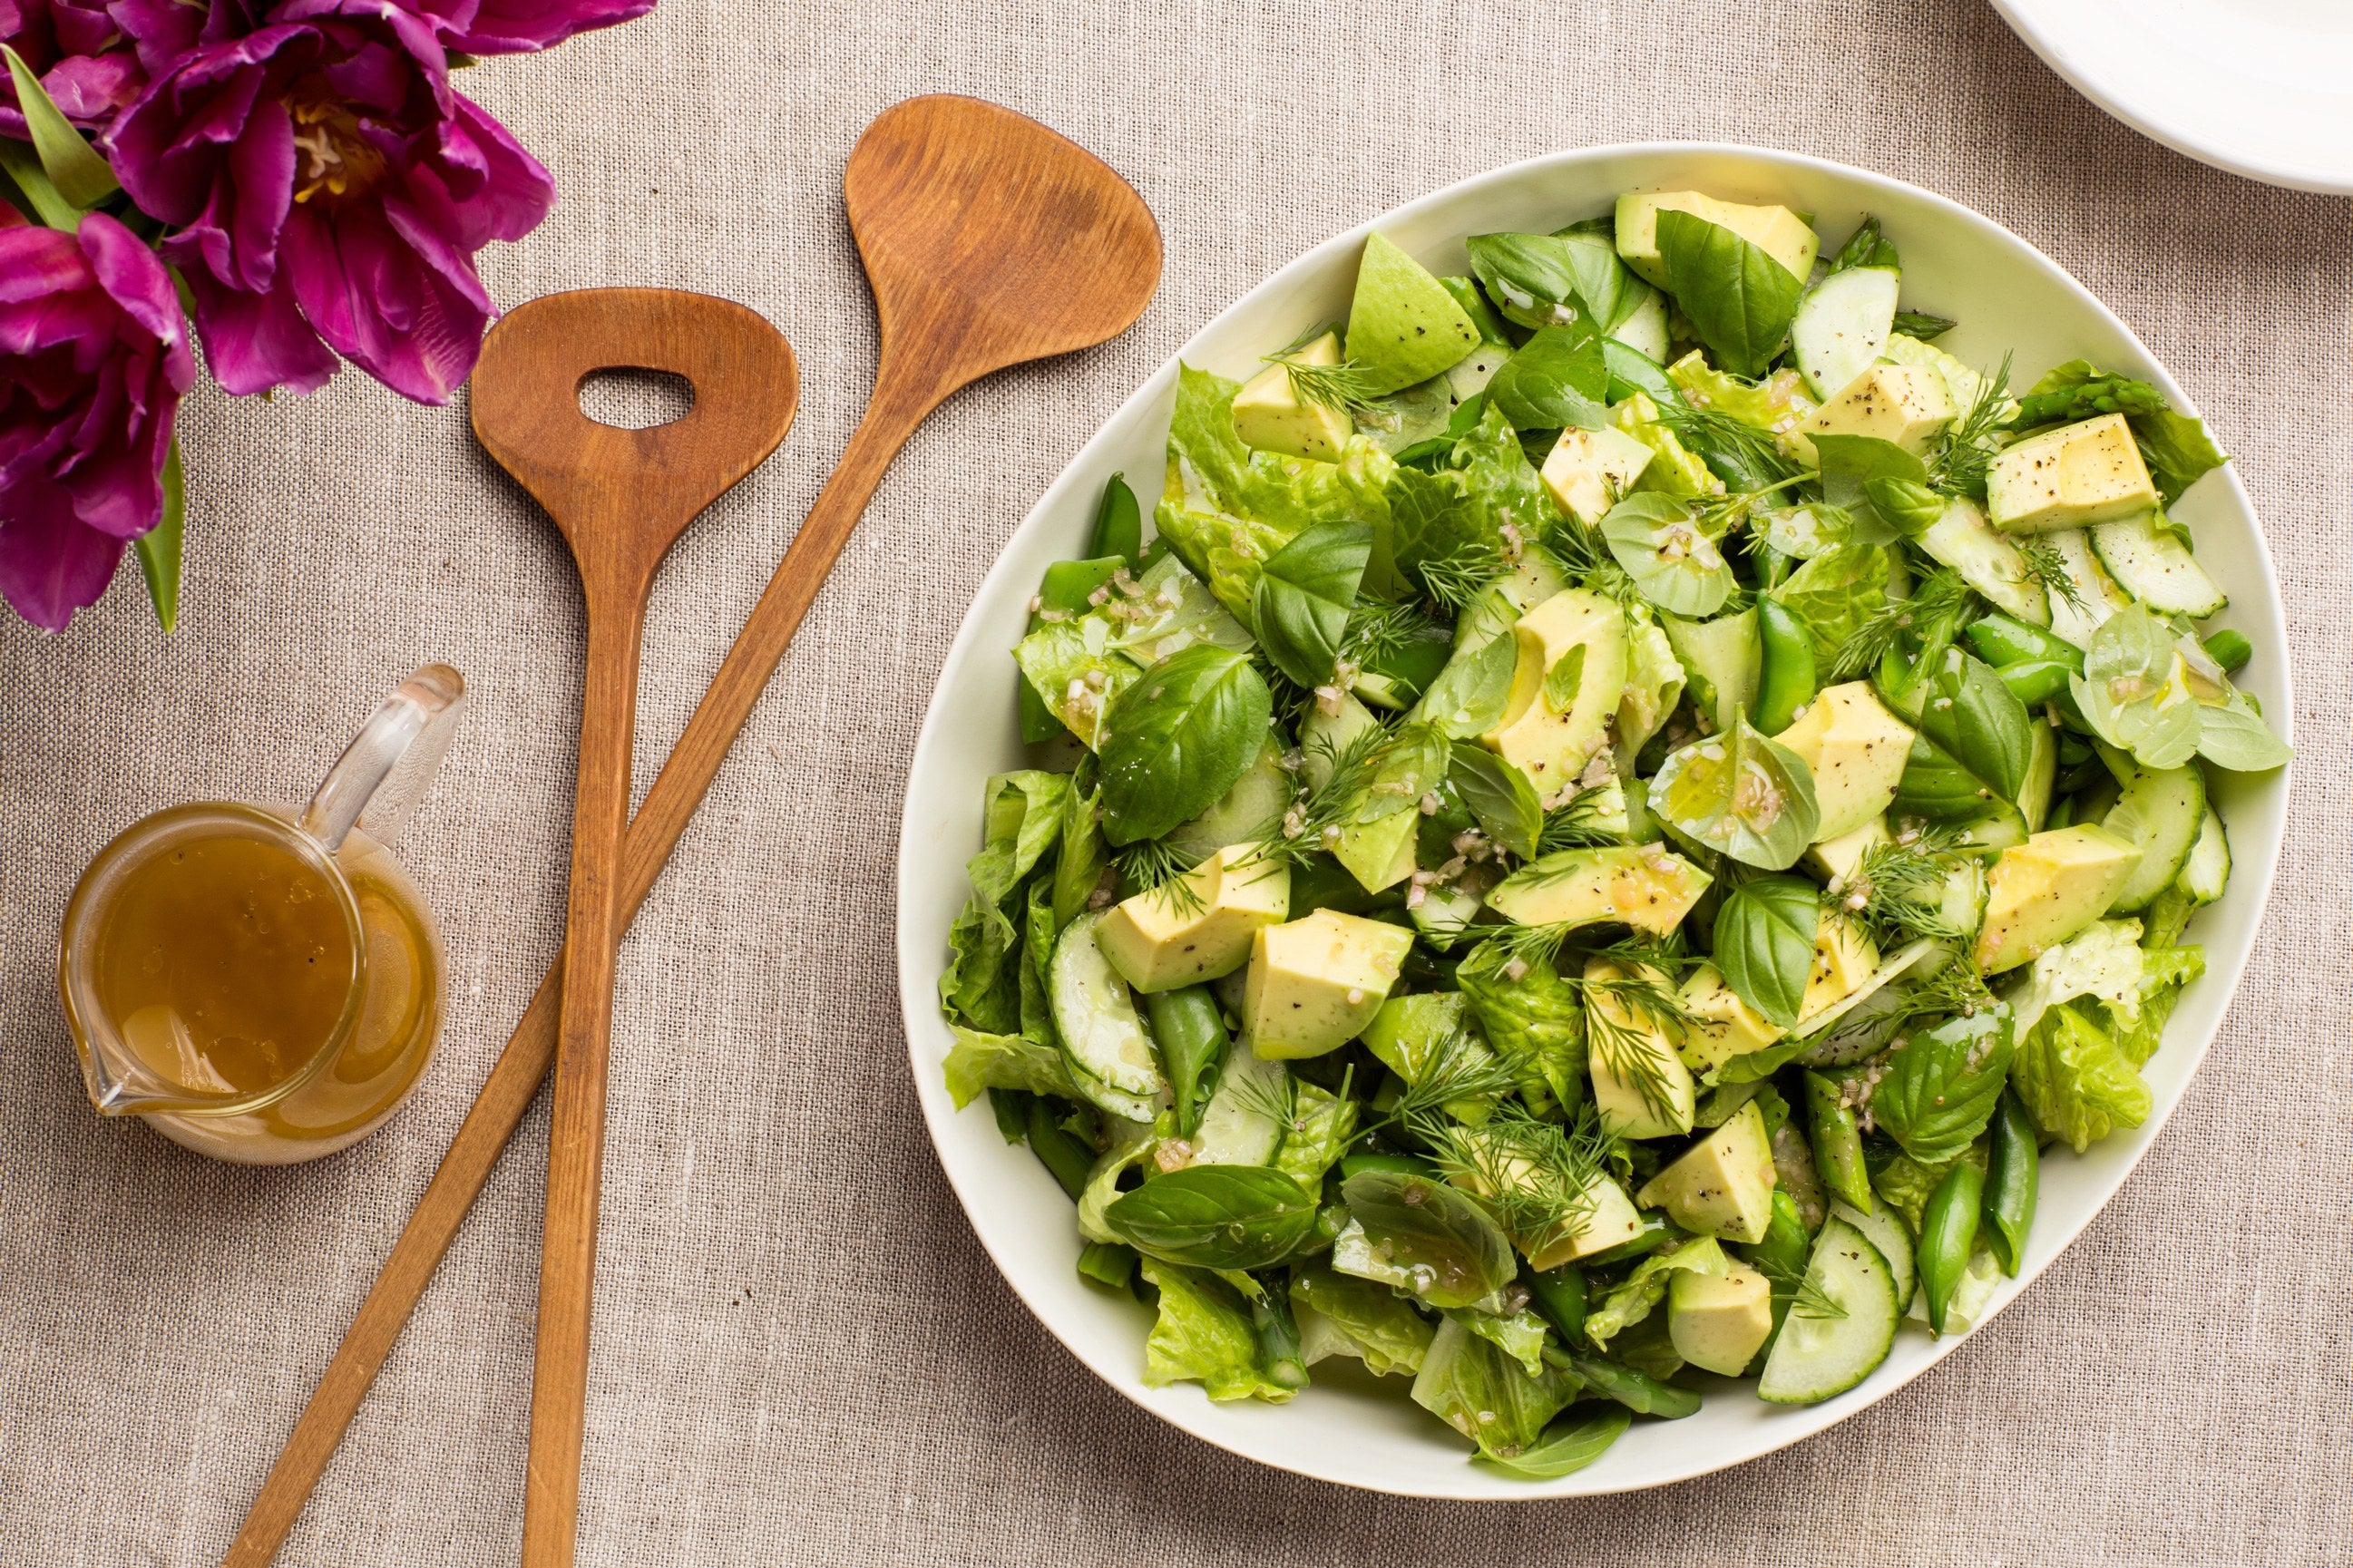 A green tossed salad with wooden salad servers.